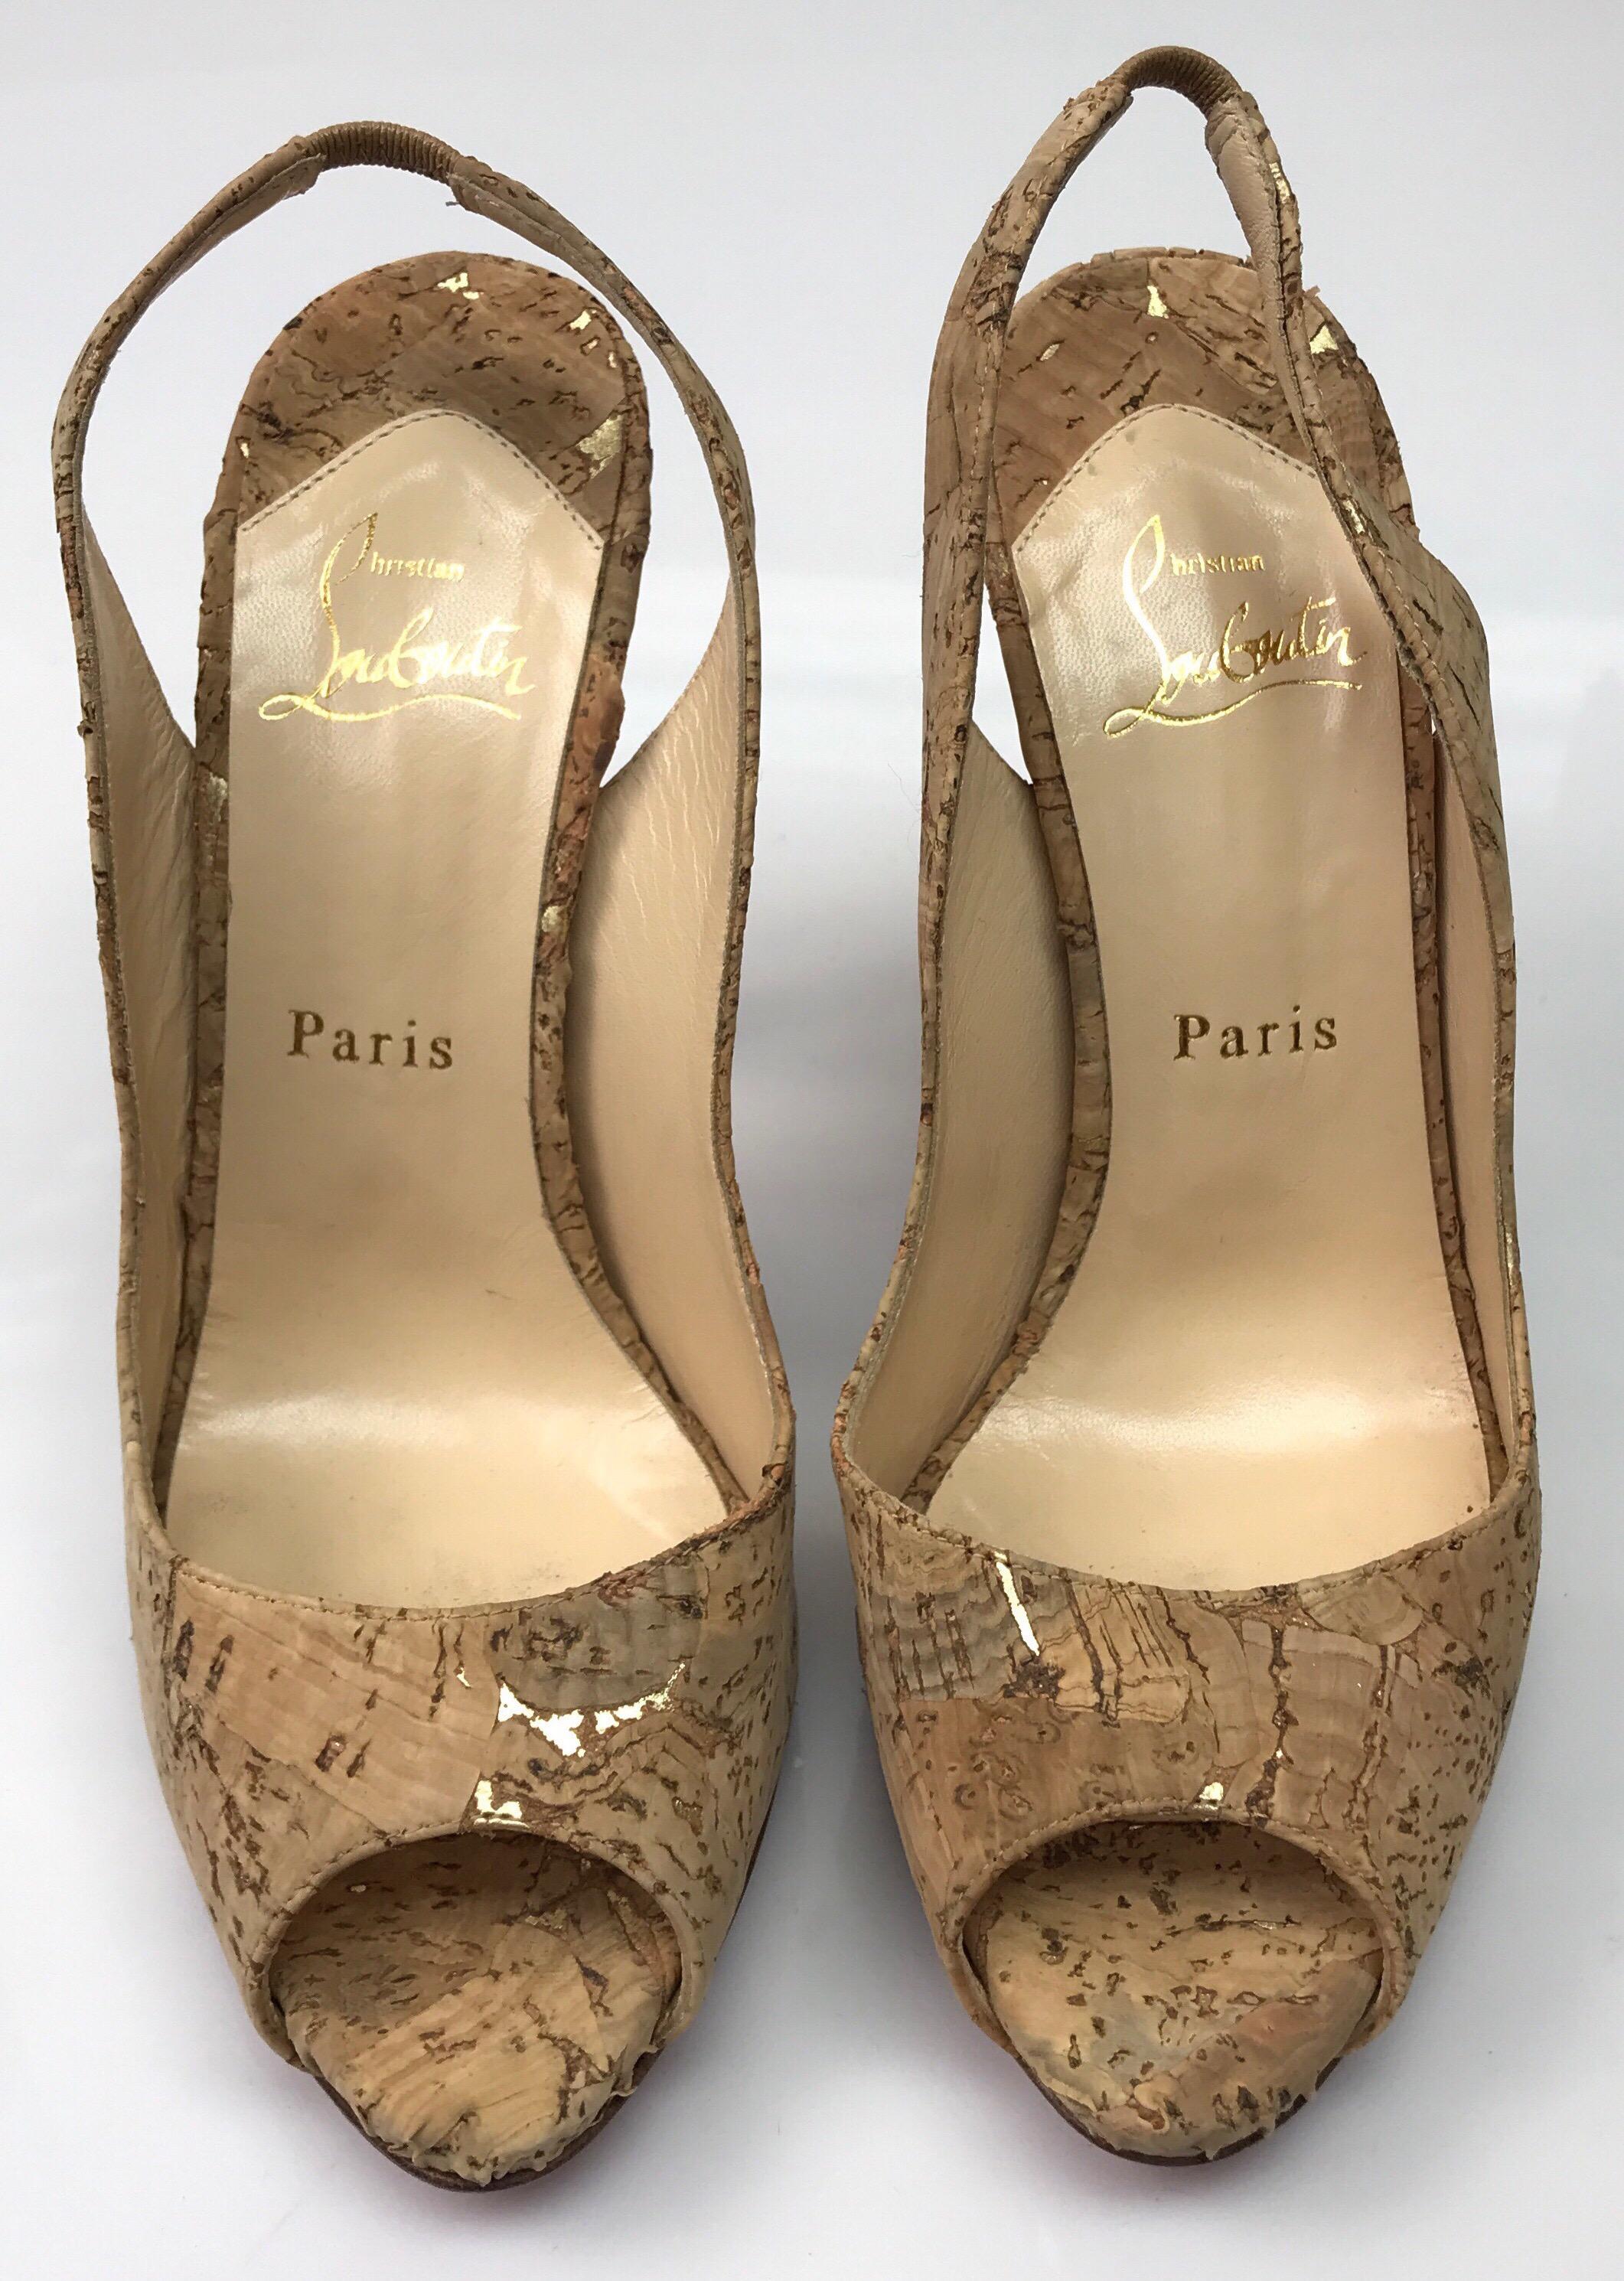 CHRISTIAN LOUBOUTIN Cork Slingback pumps- 37.5. These beautiful Christian Louboutin pumps are in excellent condition. They show minimal sign of wear, including some staining on the inside of the shoe.  The heel is made of cork material and has a